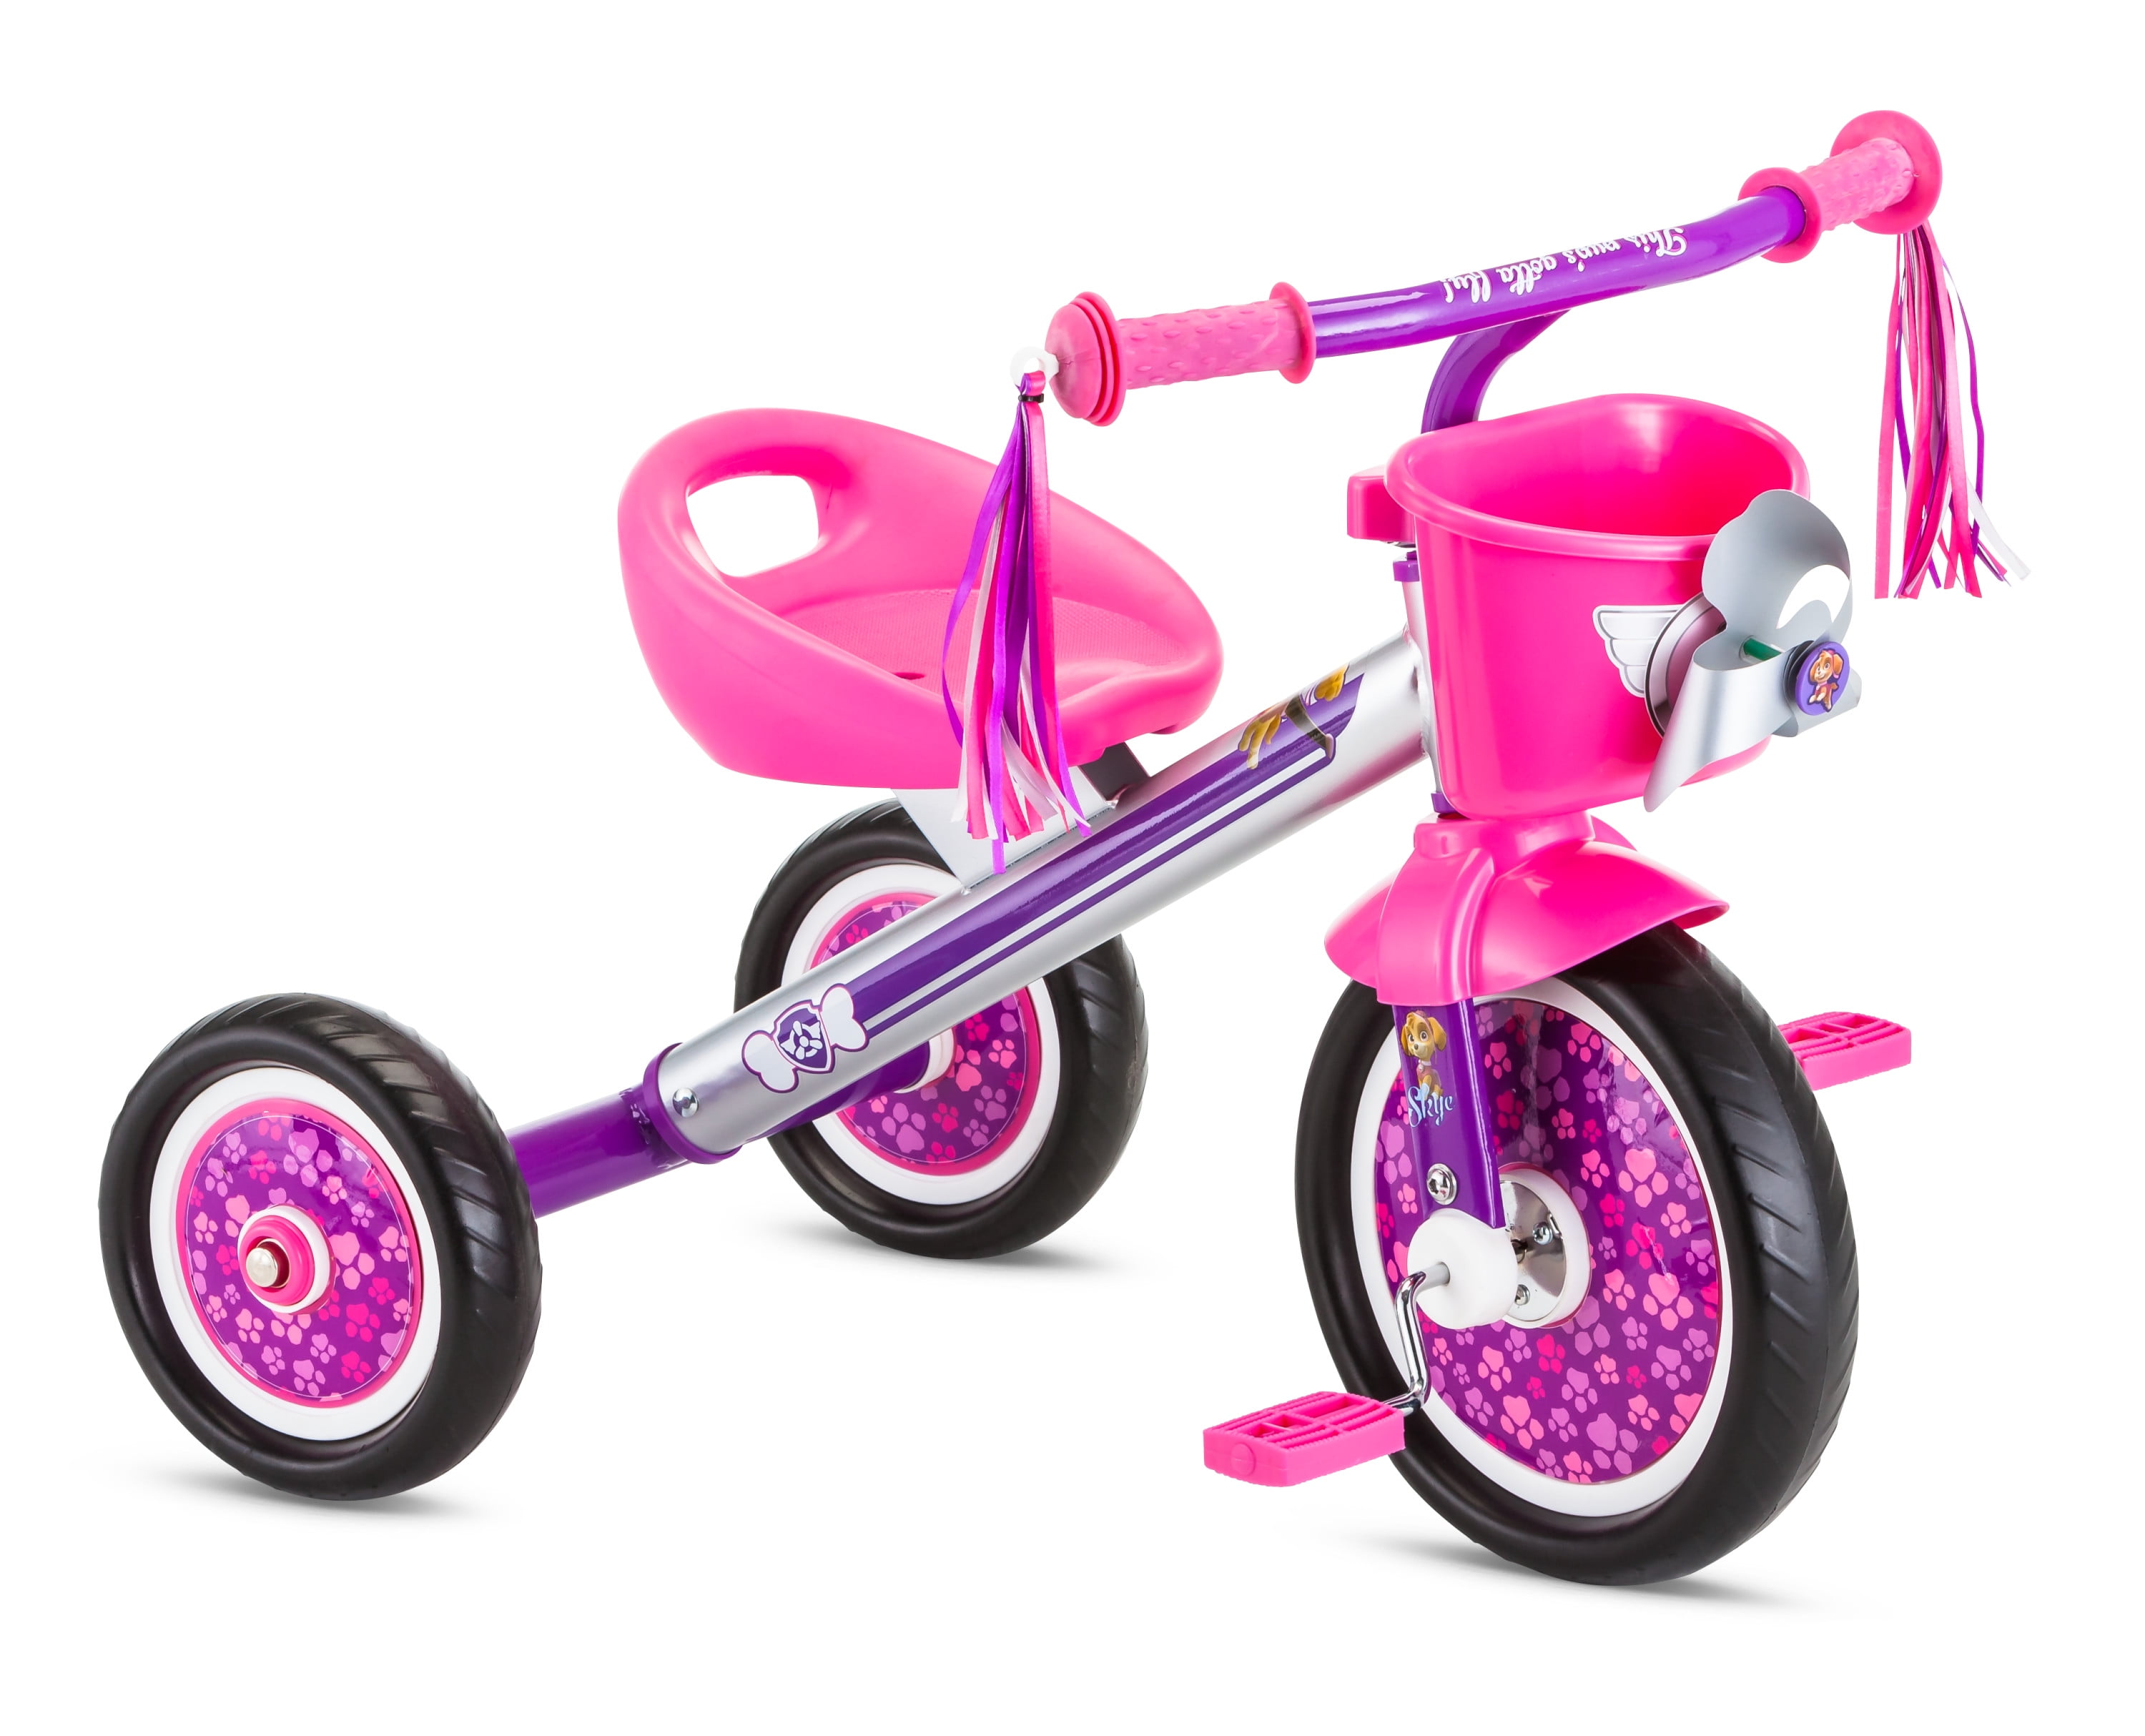 Kids Tricycle Bike Toddler Outdoor Folding Trike Adjustable Seat Red Or Pink New 